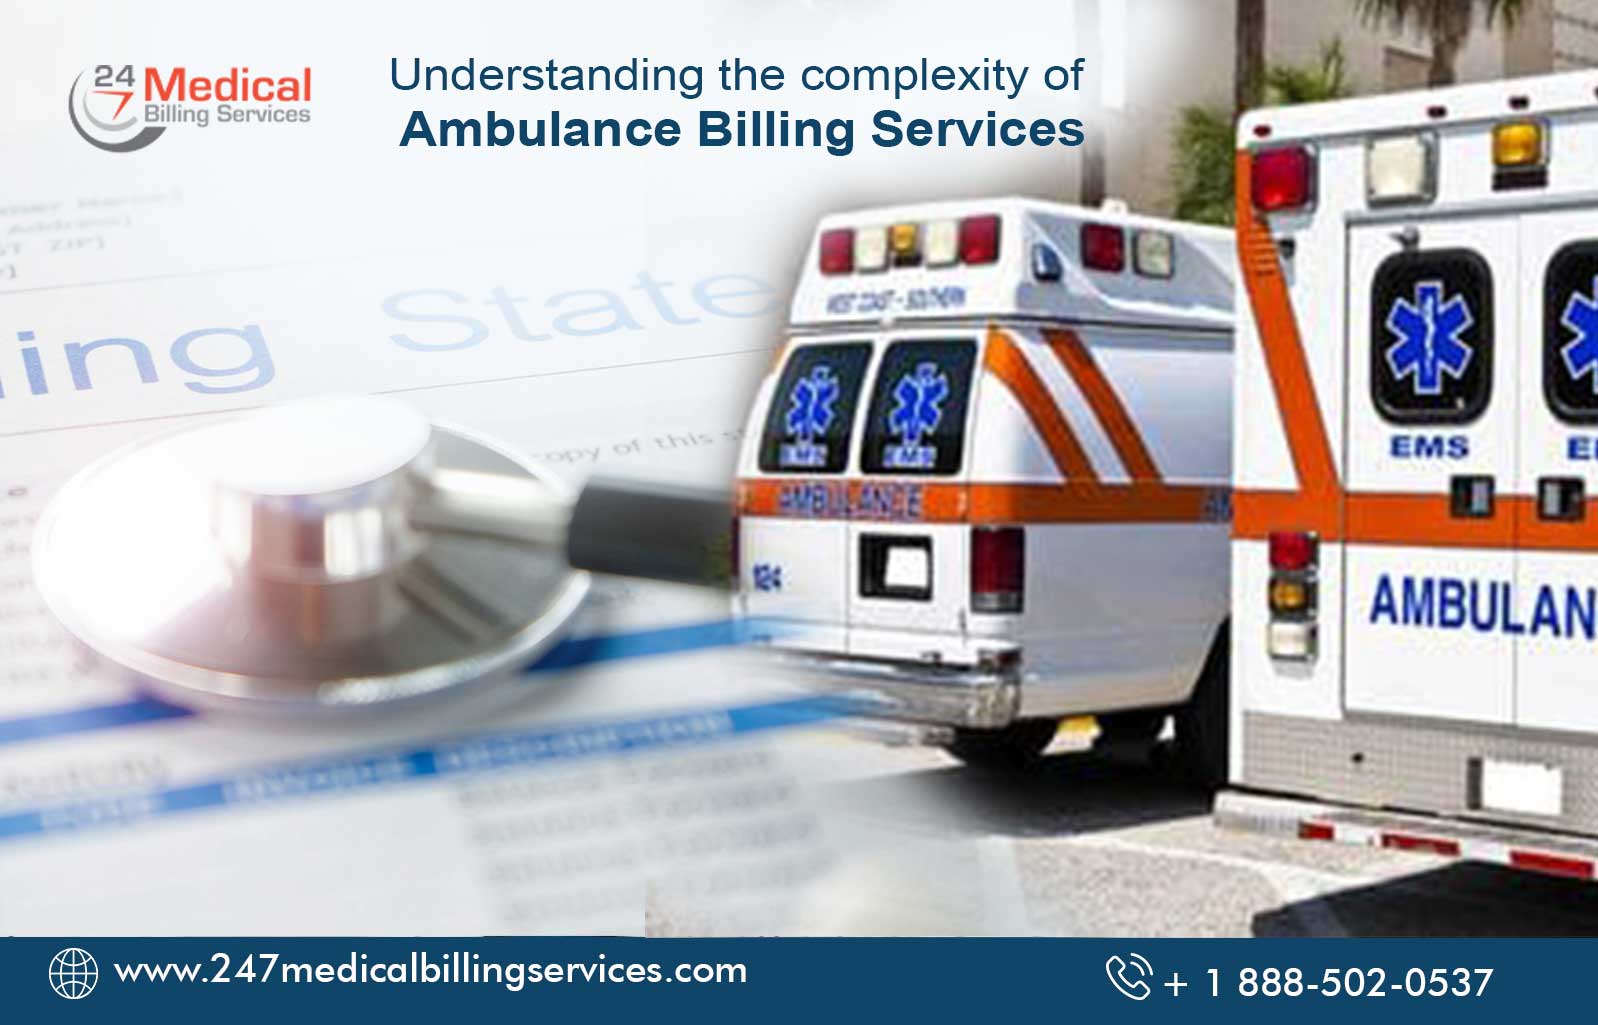  Understanding the complexity of Ambulance Billing Services